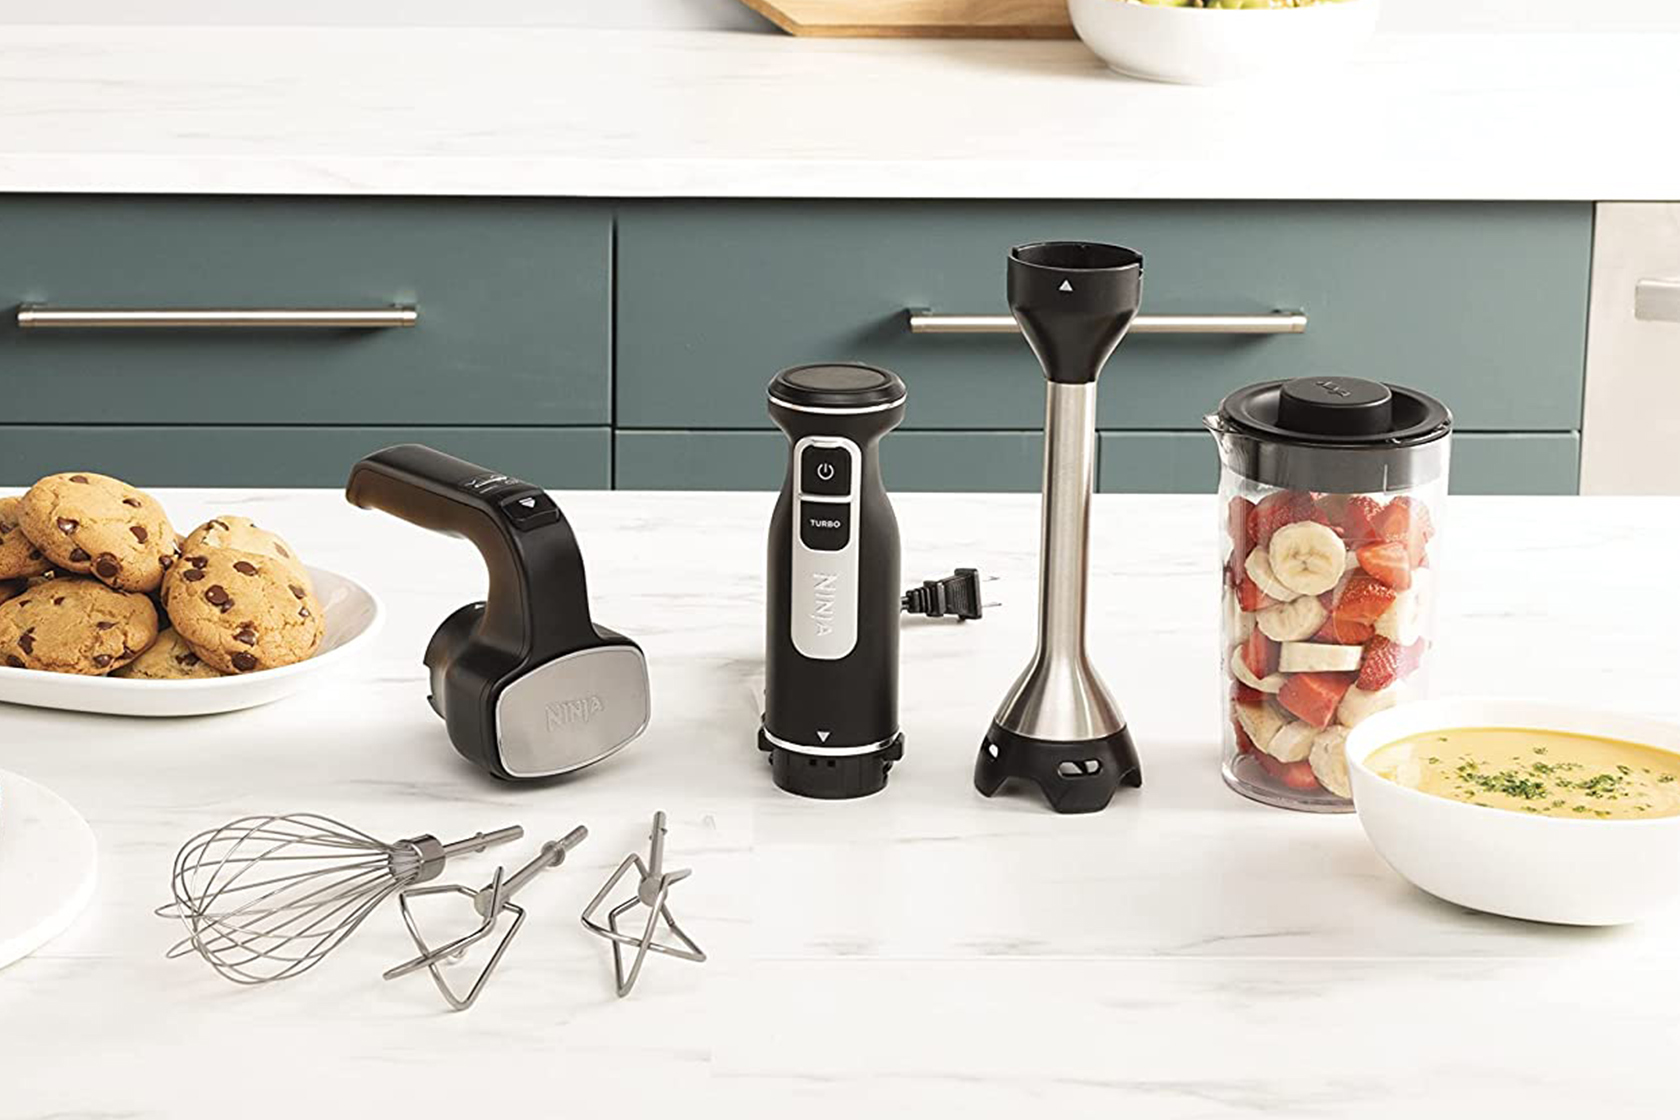 This Ninja Foodi Power Mixer will handle your food prep for under $80